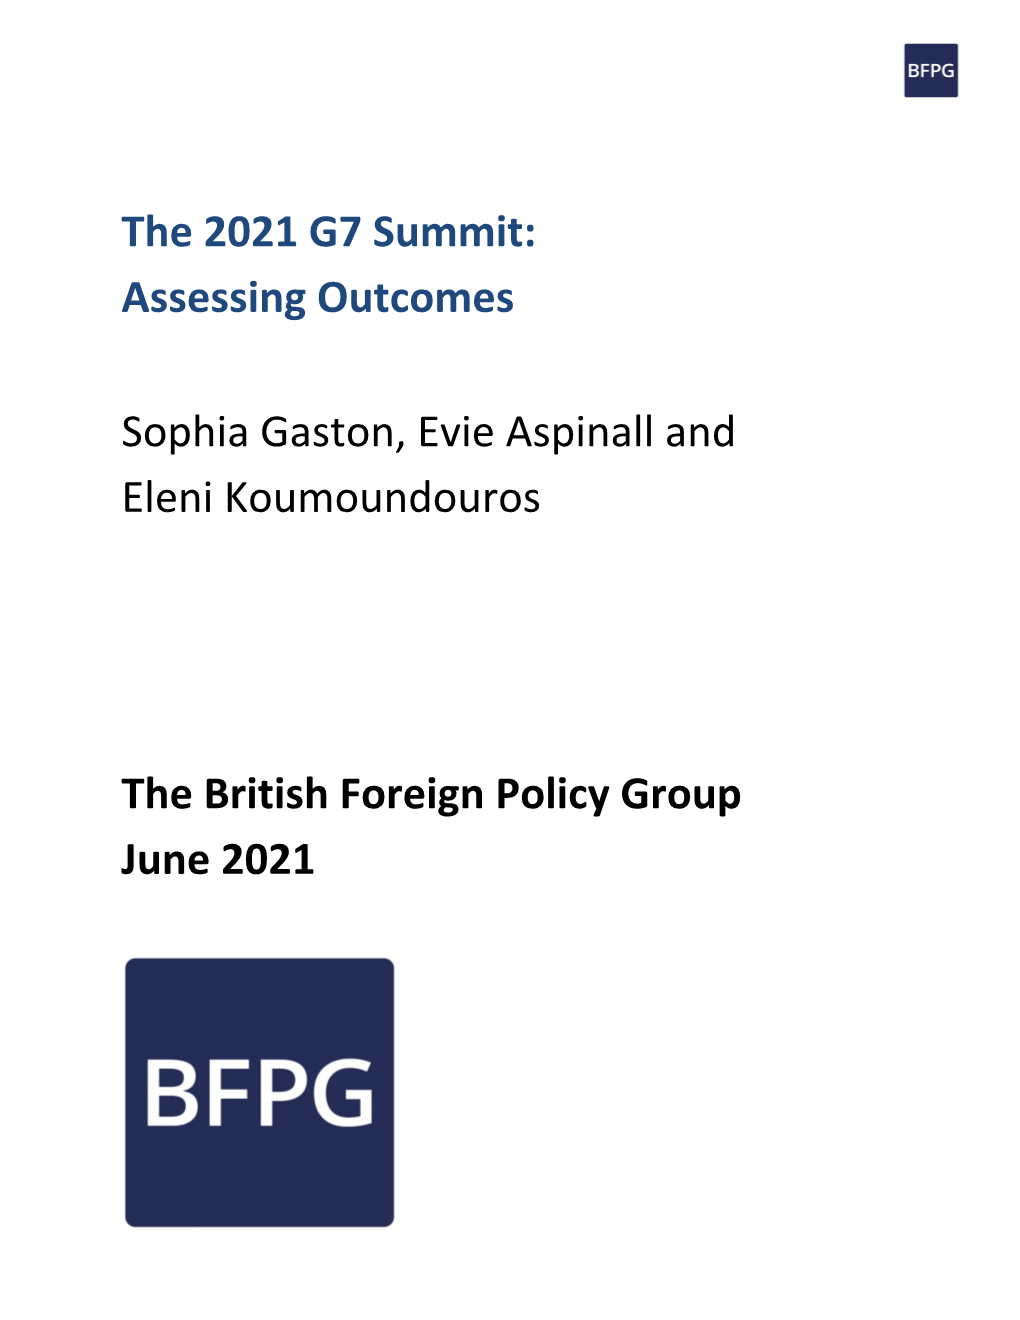 The 2021 G7 Summit: Assessing Outcomes